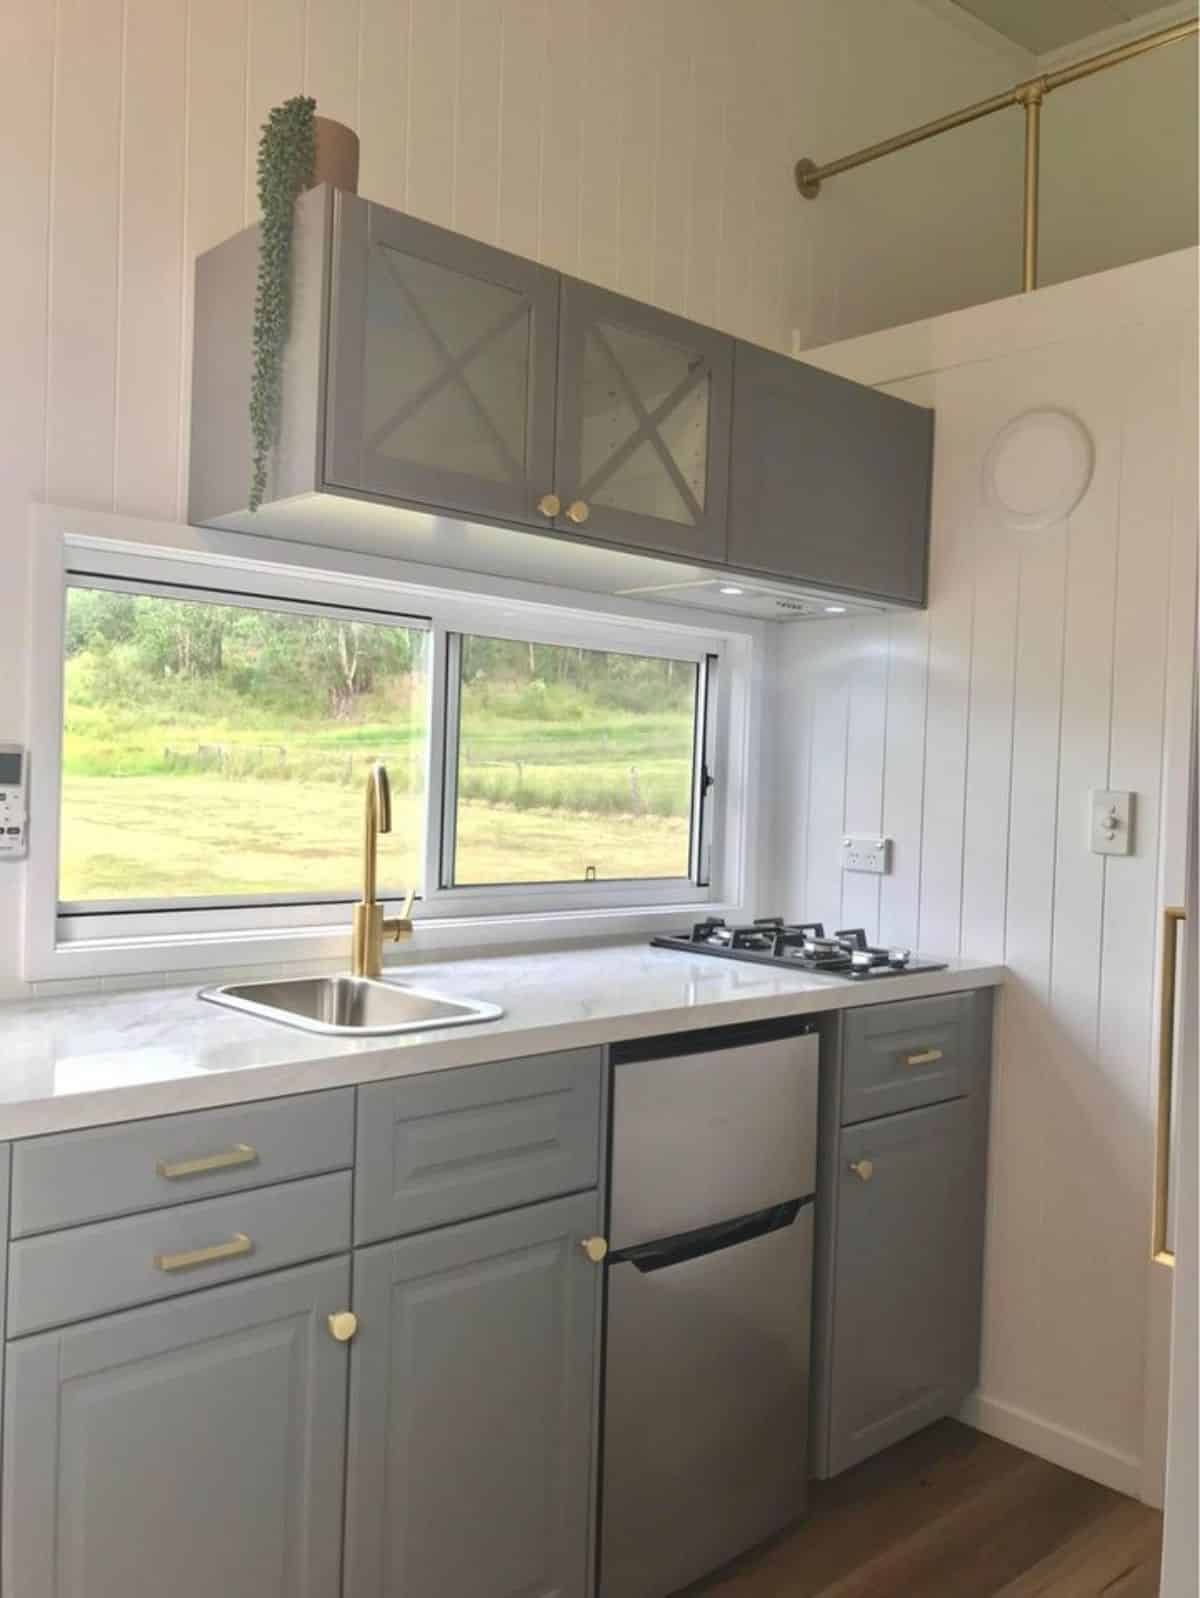 Stylish and well organized kitchen of furnished tiny house has all the necessary appliances and storage cabinets